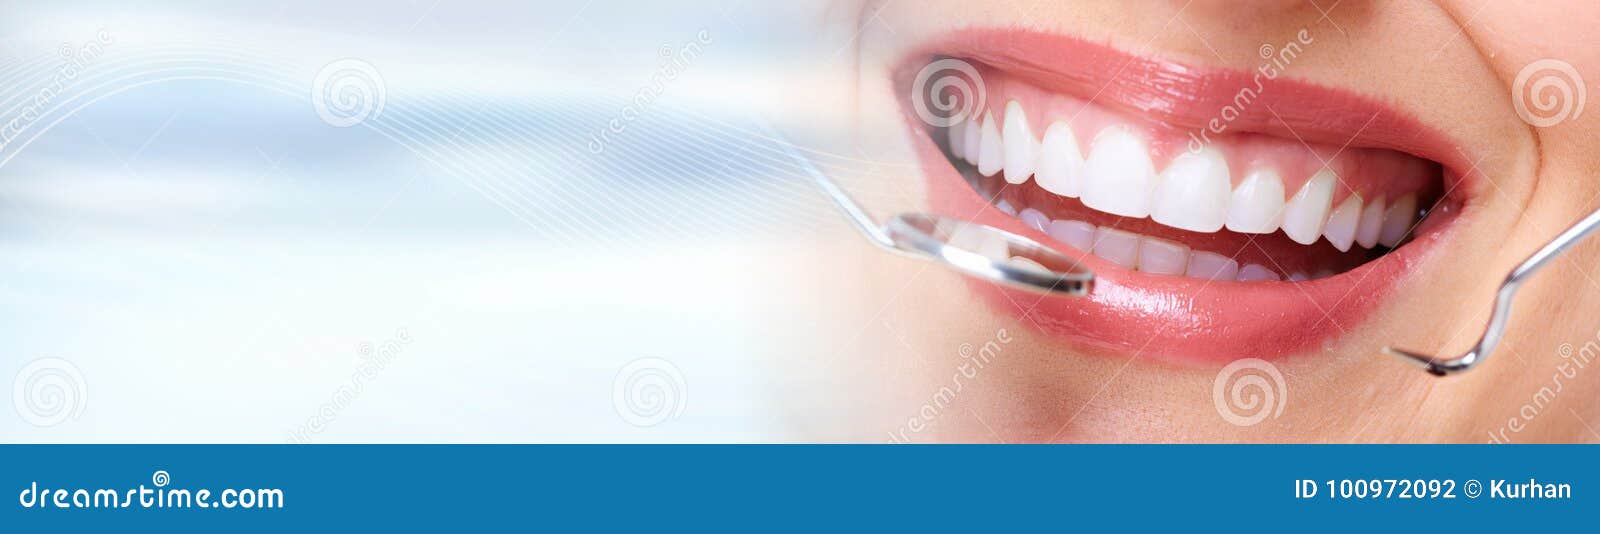 woman teeth with dental instruments